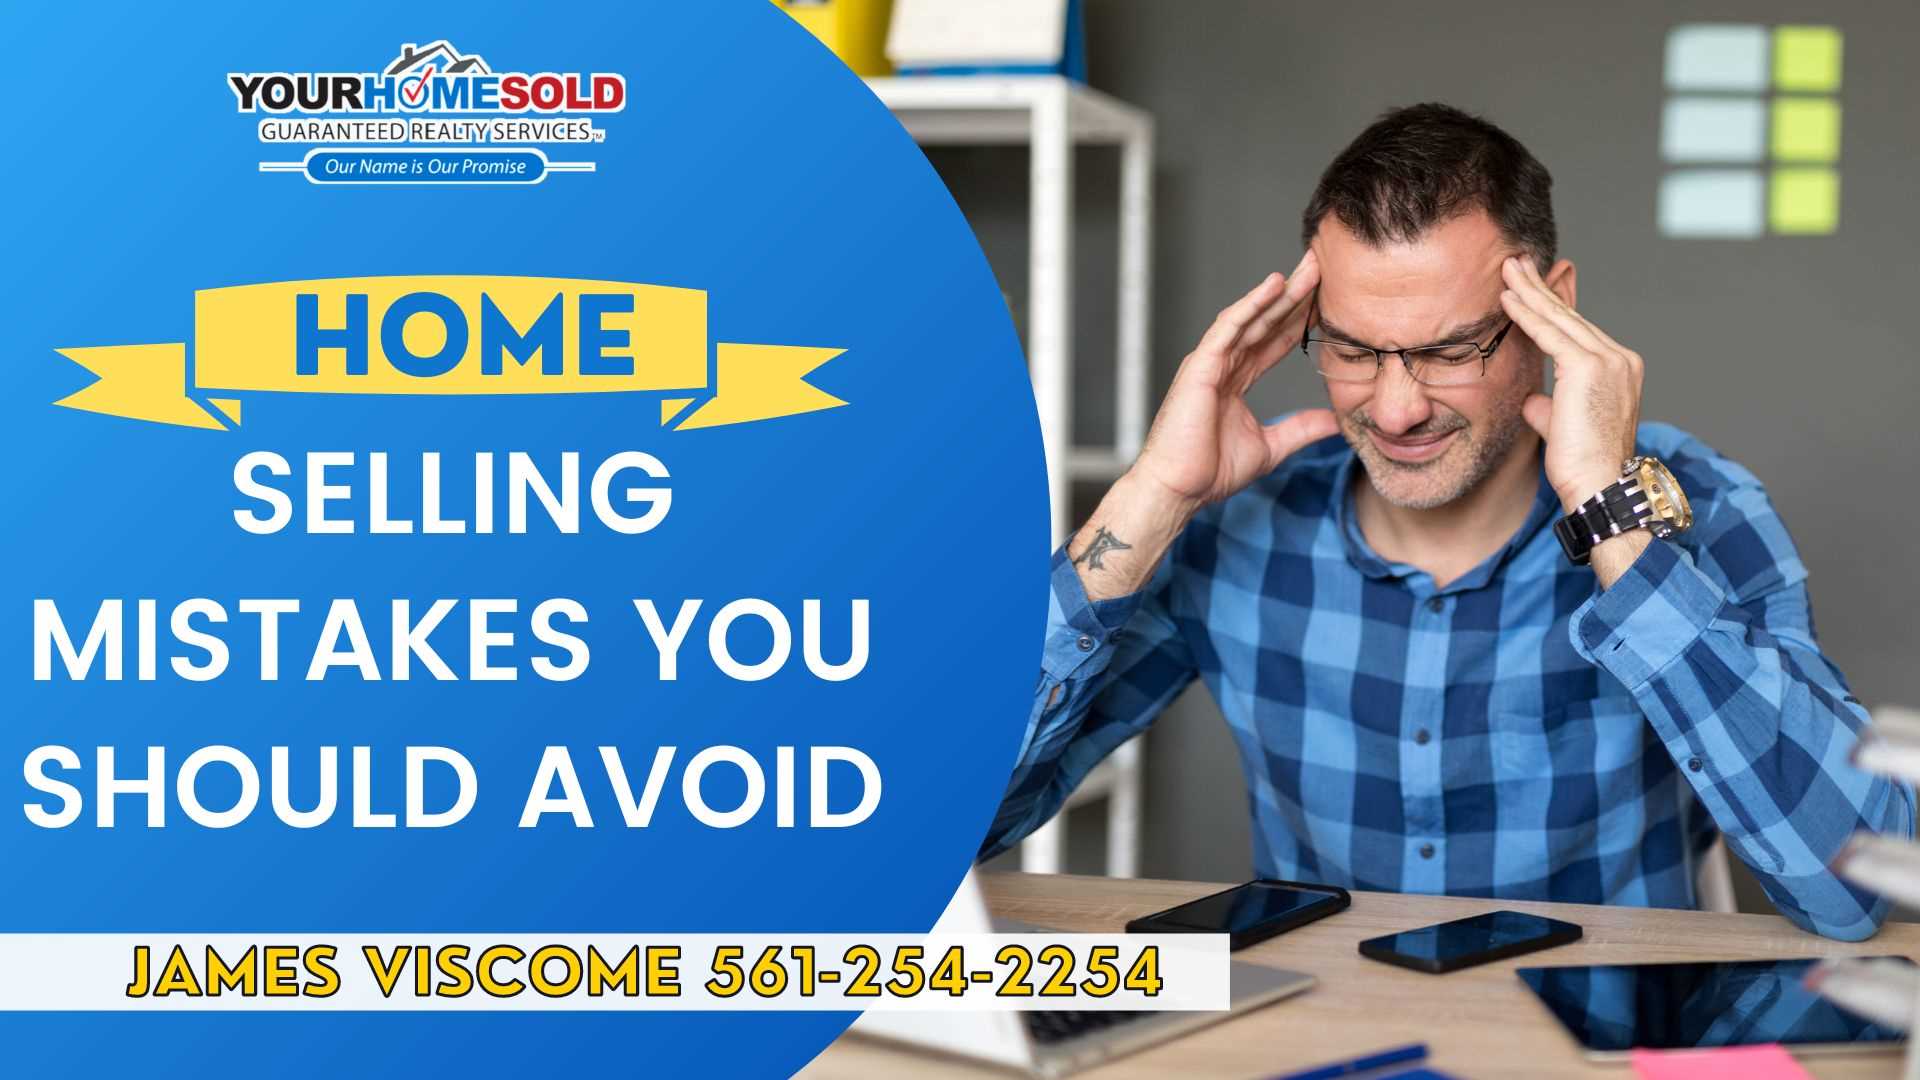 Here are the Top 8 Home Selling Mistakes You Should Avoid